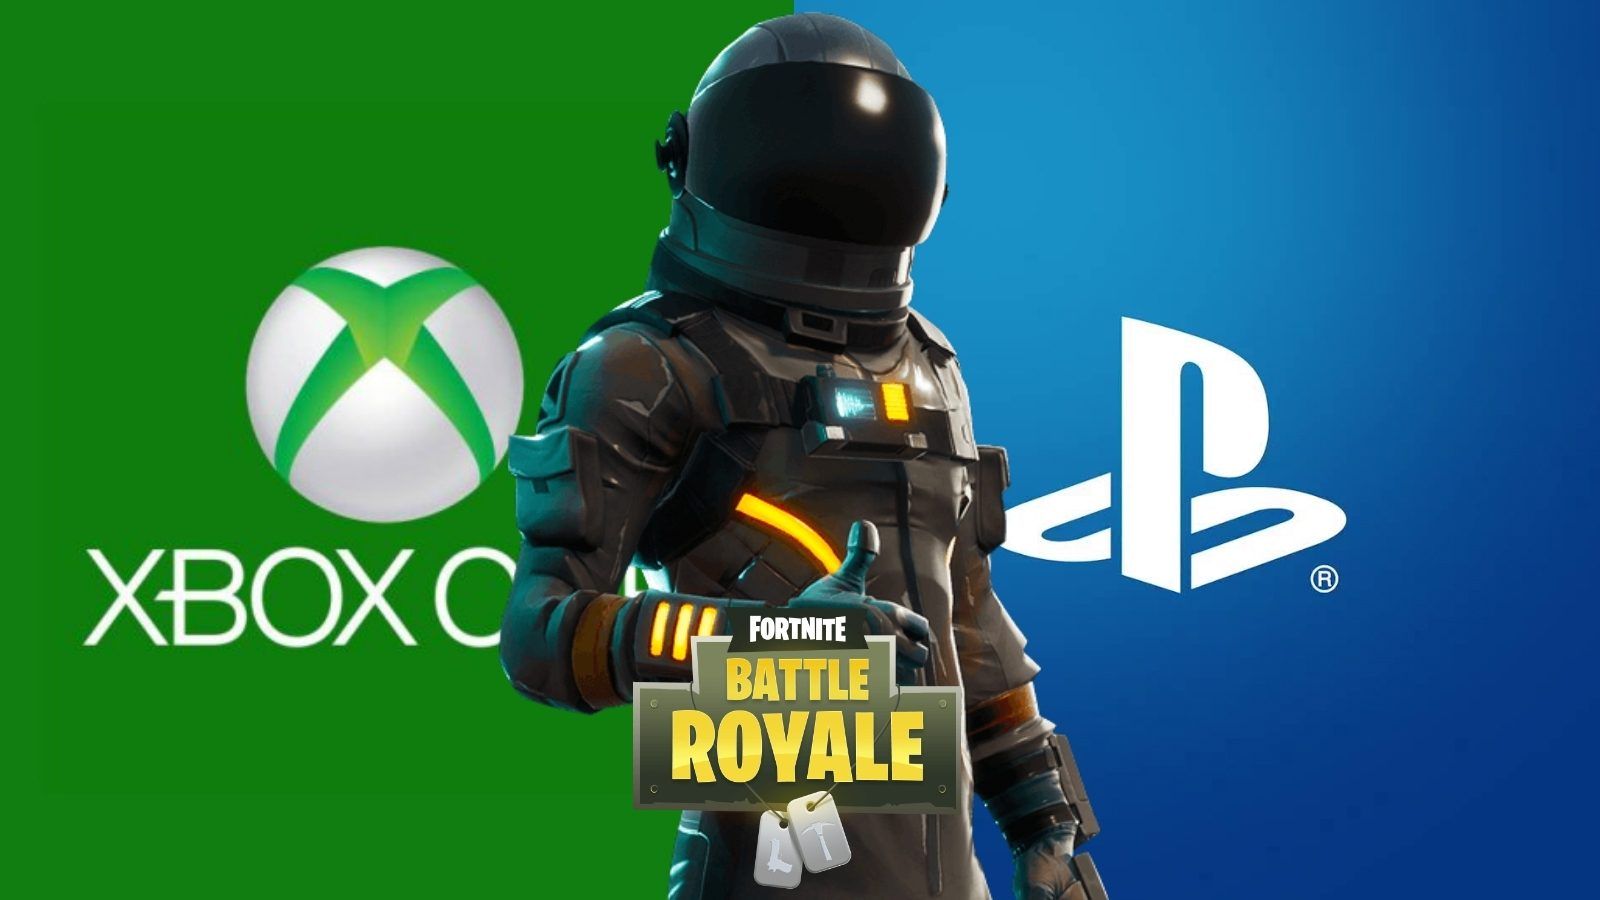 Success of Fortnite Appears to Have Boosted Xbox Live